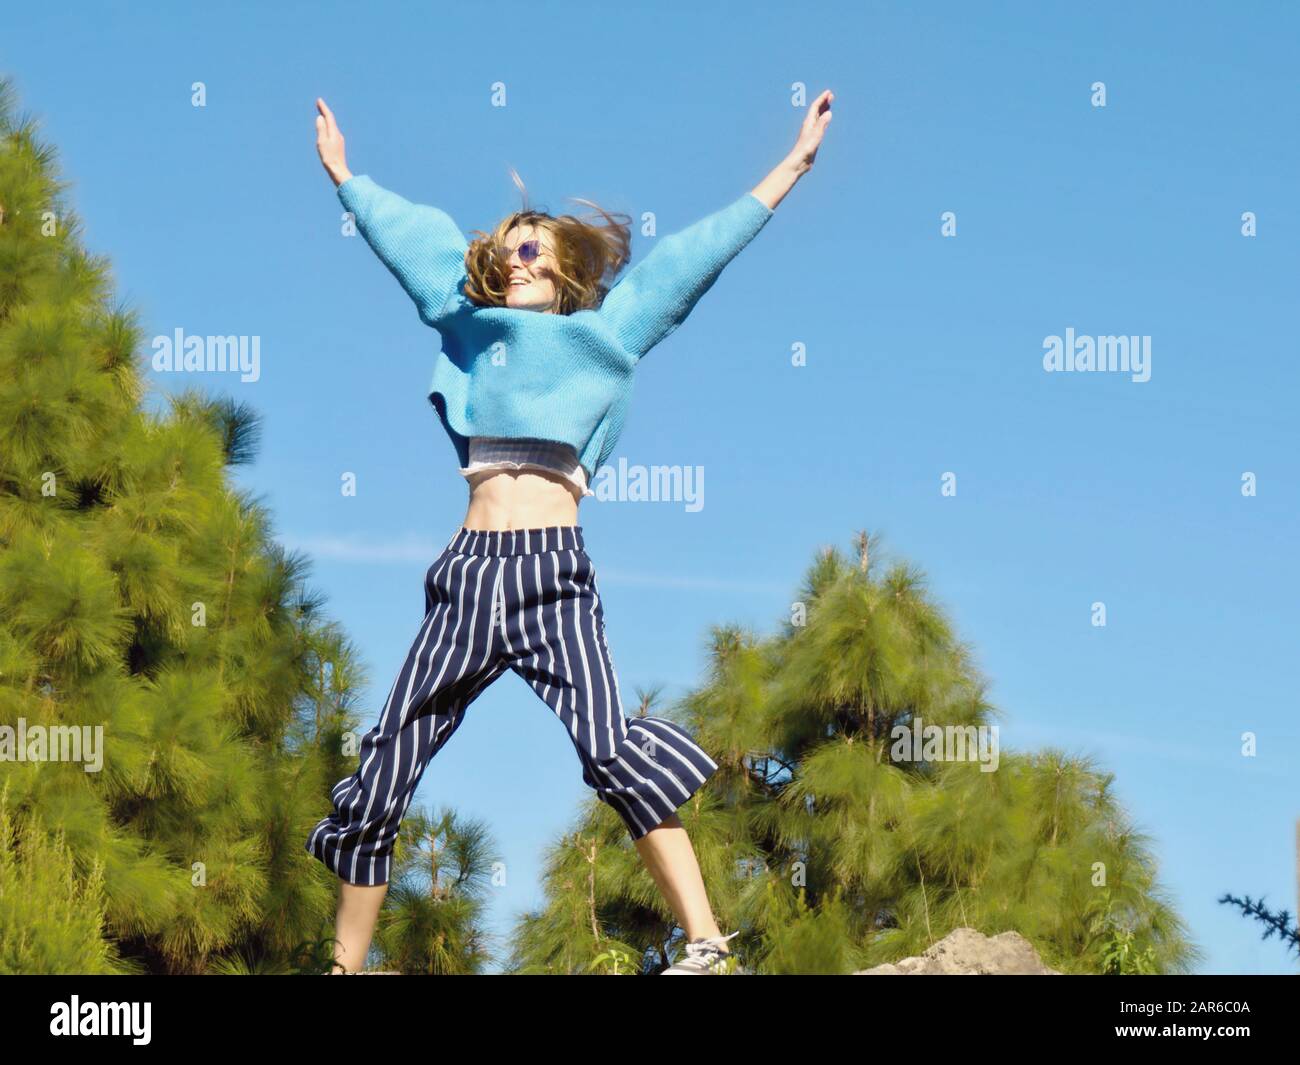 A young woman with a blue sweater and dark blue striped pants makes a leap in the air, her body forming an X shape. Behind it a few green trees and ve Stock Photo